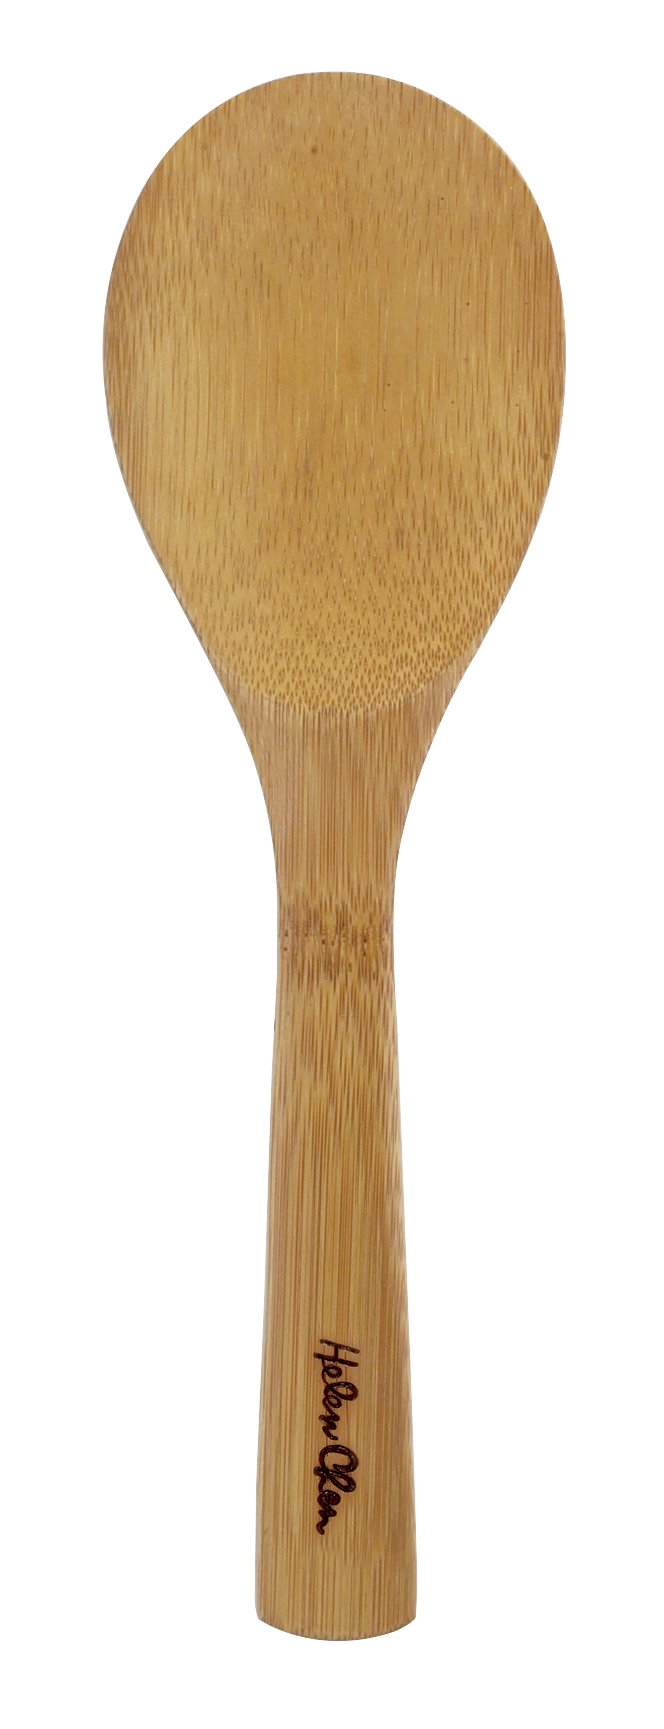 Helen’s Asian Kitchen Rice Paddle, Natural Bamboo, 9-Inch